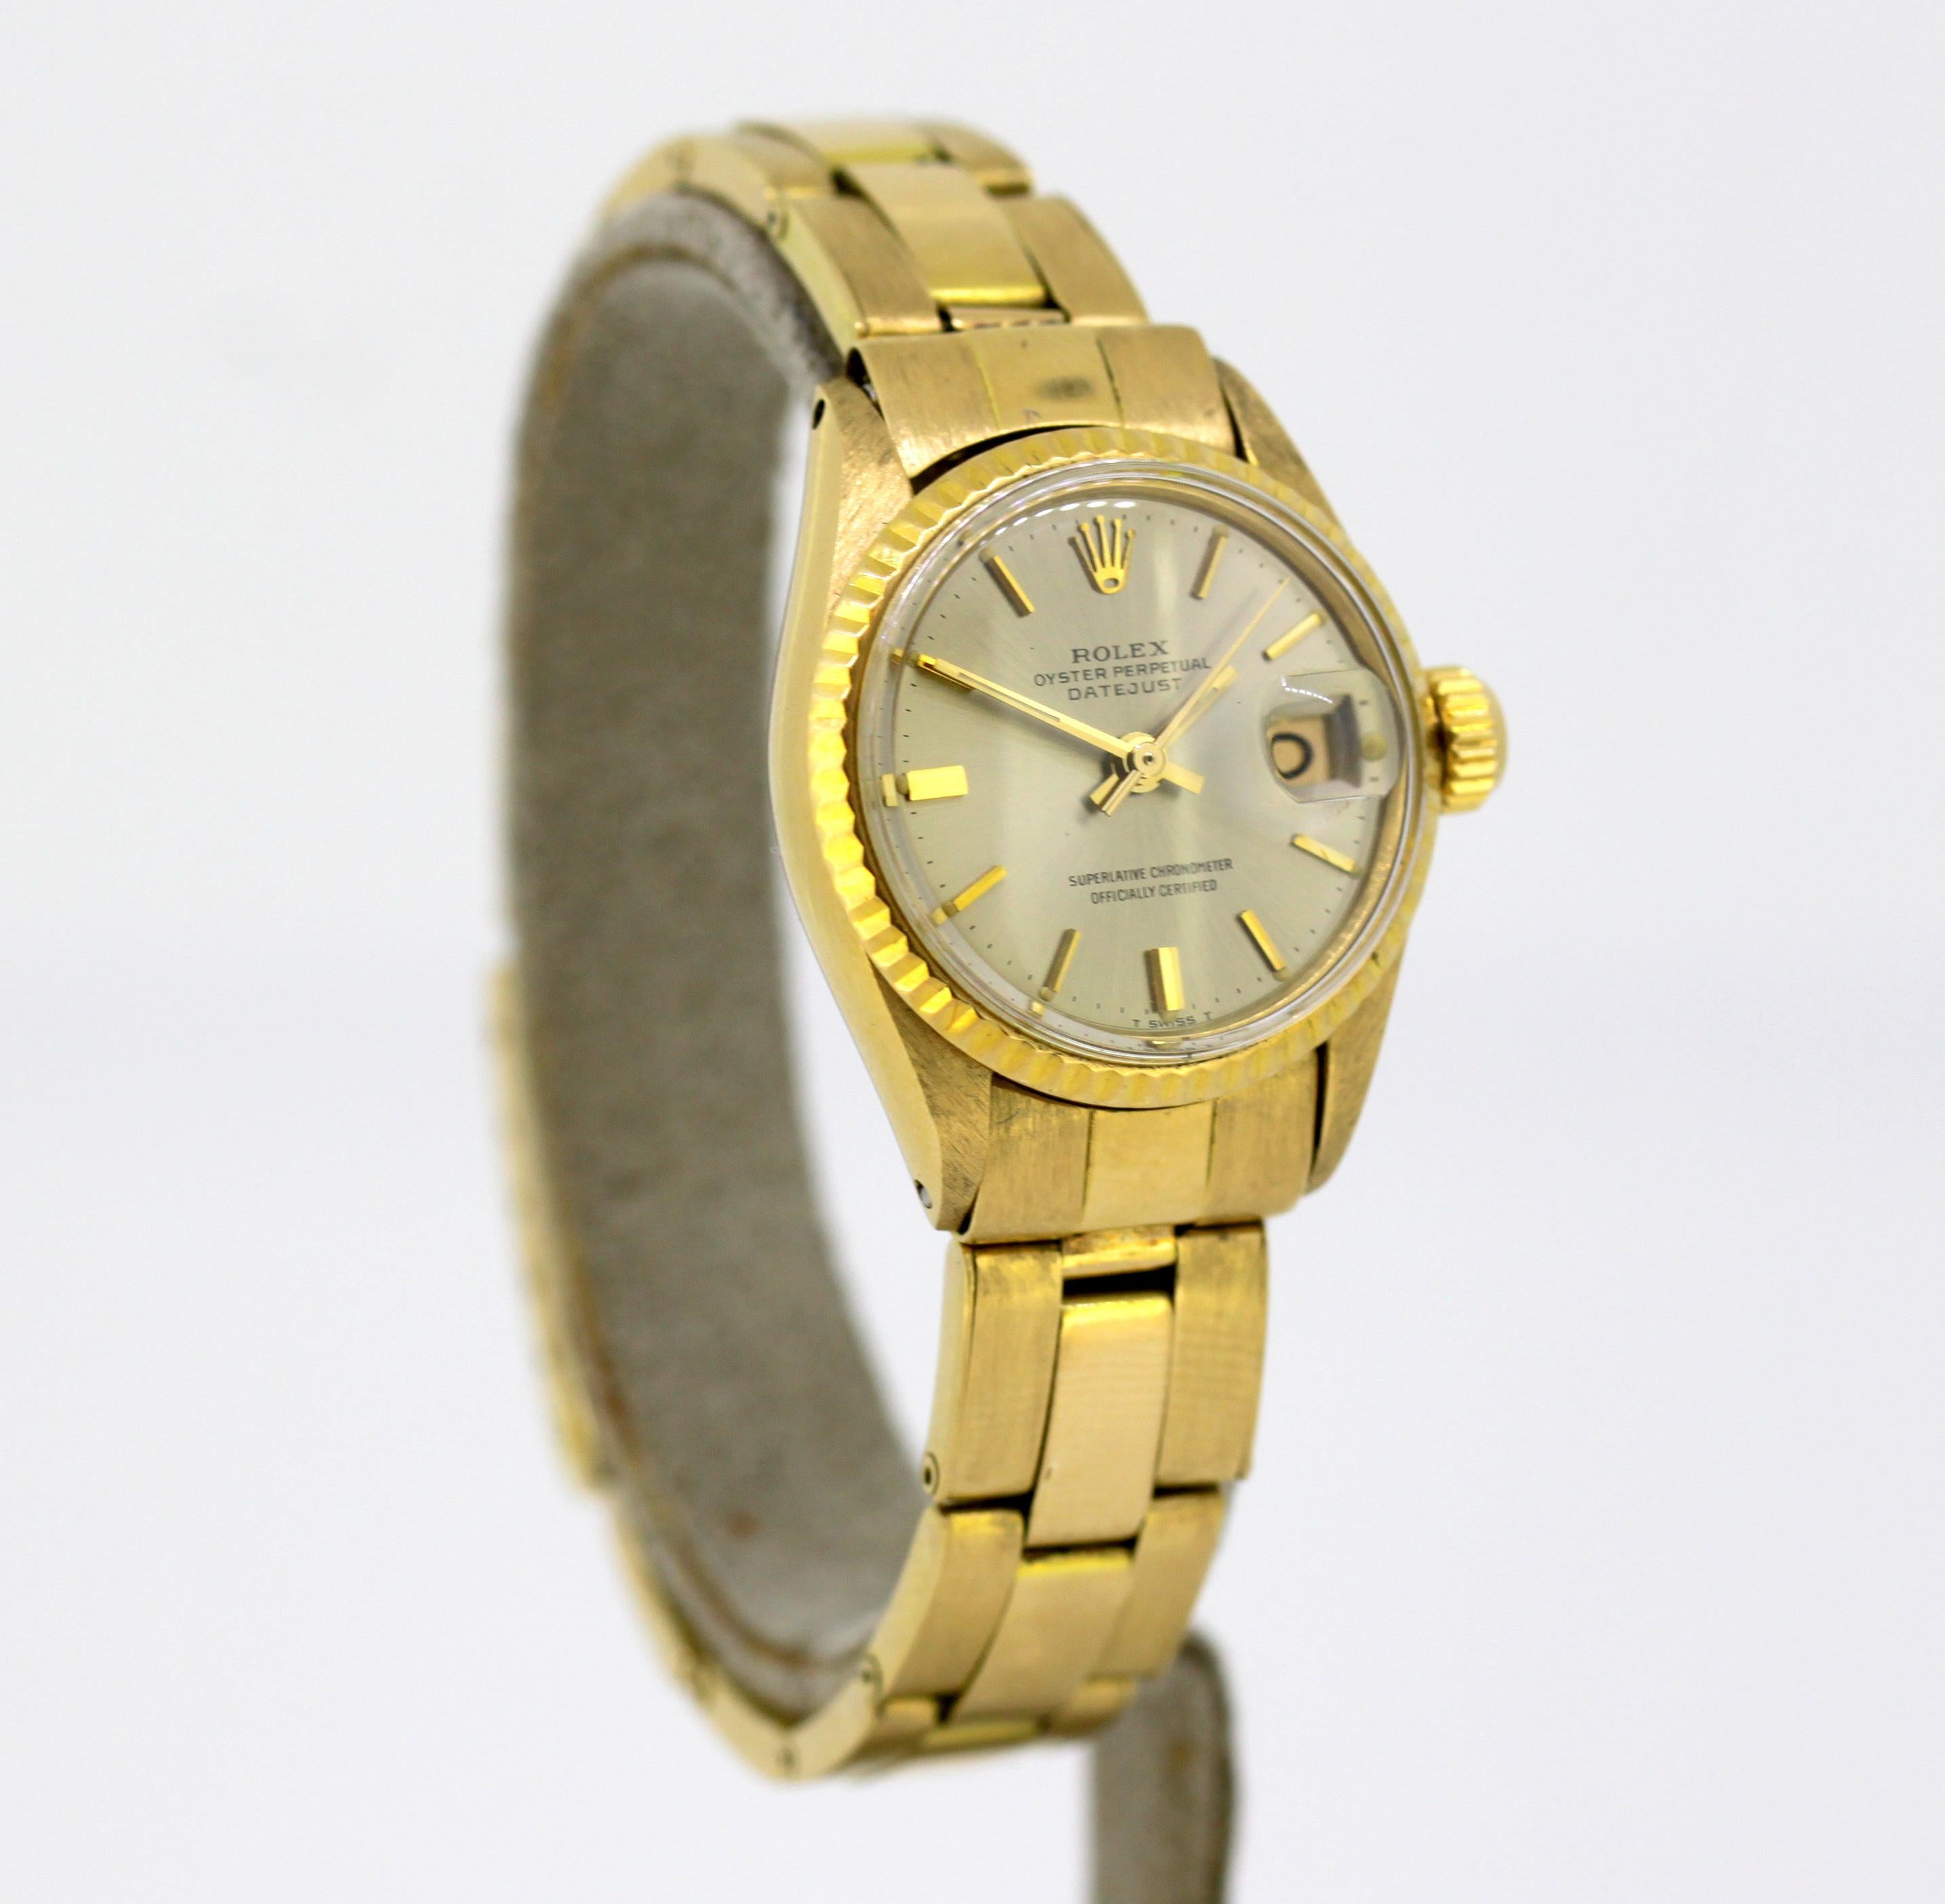 Rolex - Oyster Perpetual DateJust - Women - 1970-1979

Gender:	Ladies
Model : Oyster Perpetual DateJust
Case Diameter : 25 mm
Movement: Manual Winding
Watchband Material: 18K Gold
Case material : 18K Gold
Display Type:	Analogue	
Age: 1970's
Dial: